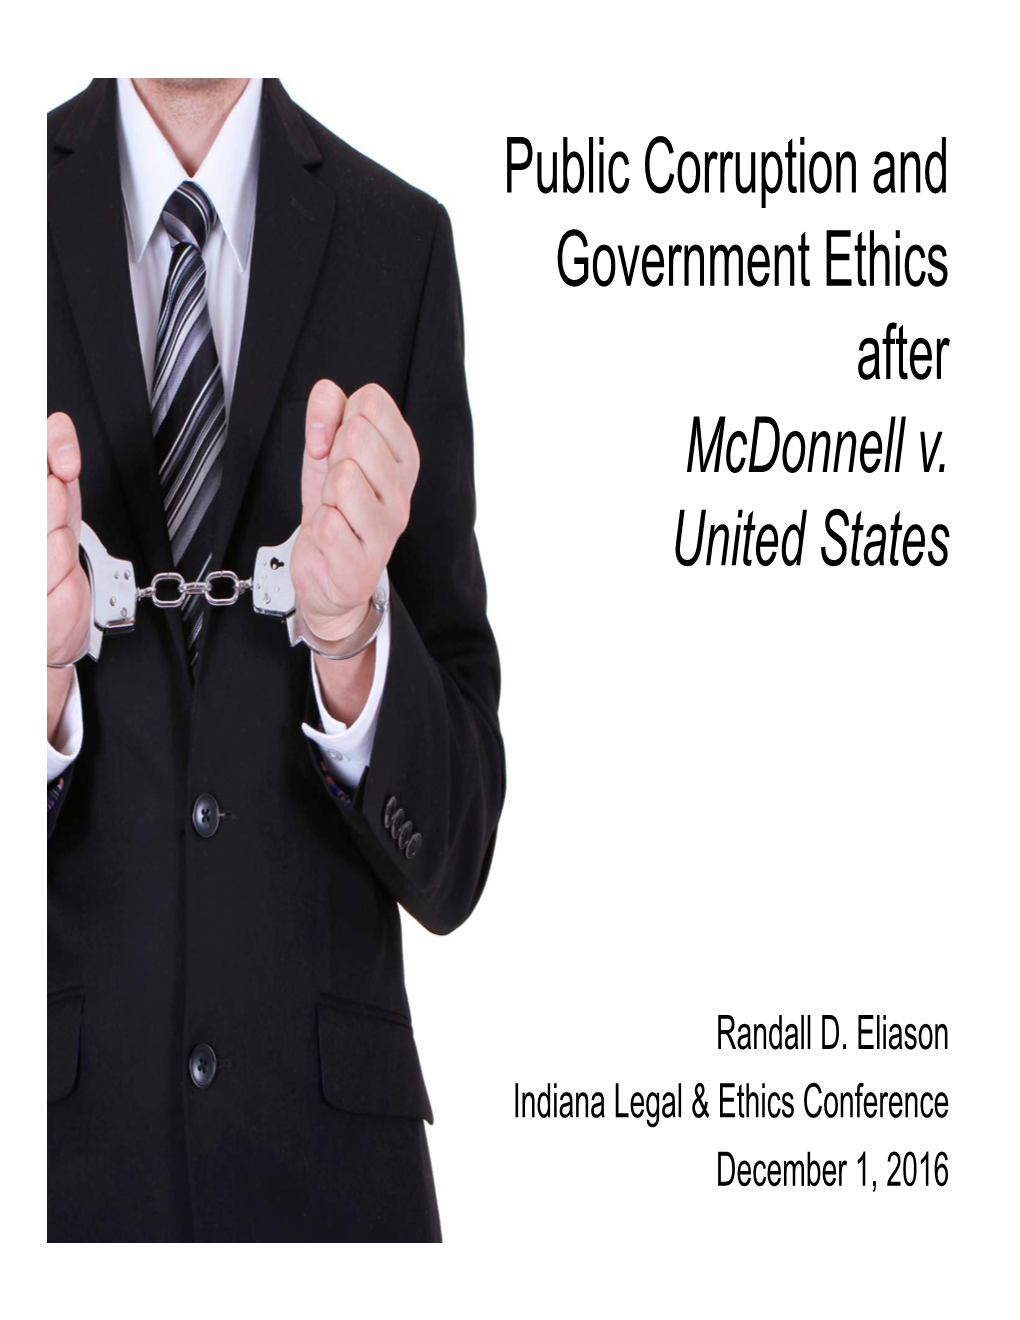 Public Corruption and Government Ethics After Mcdonnell V. United States